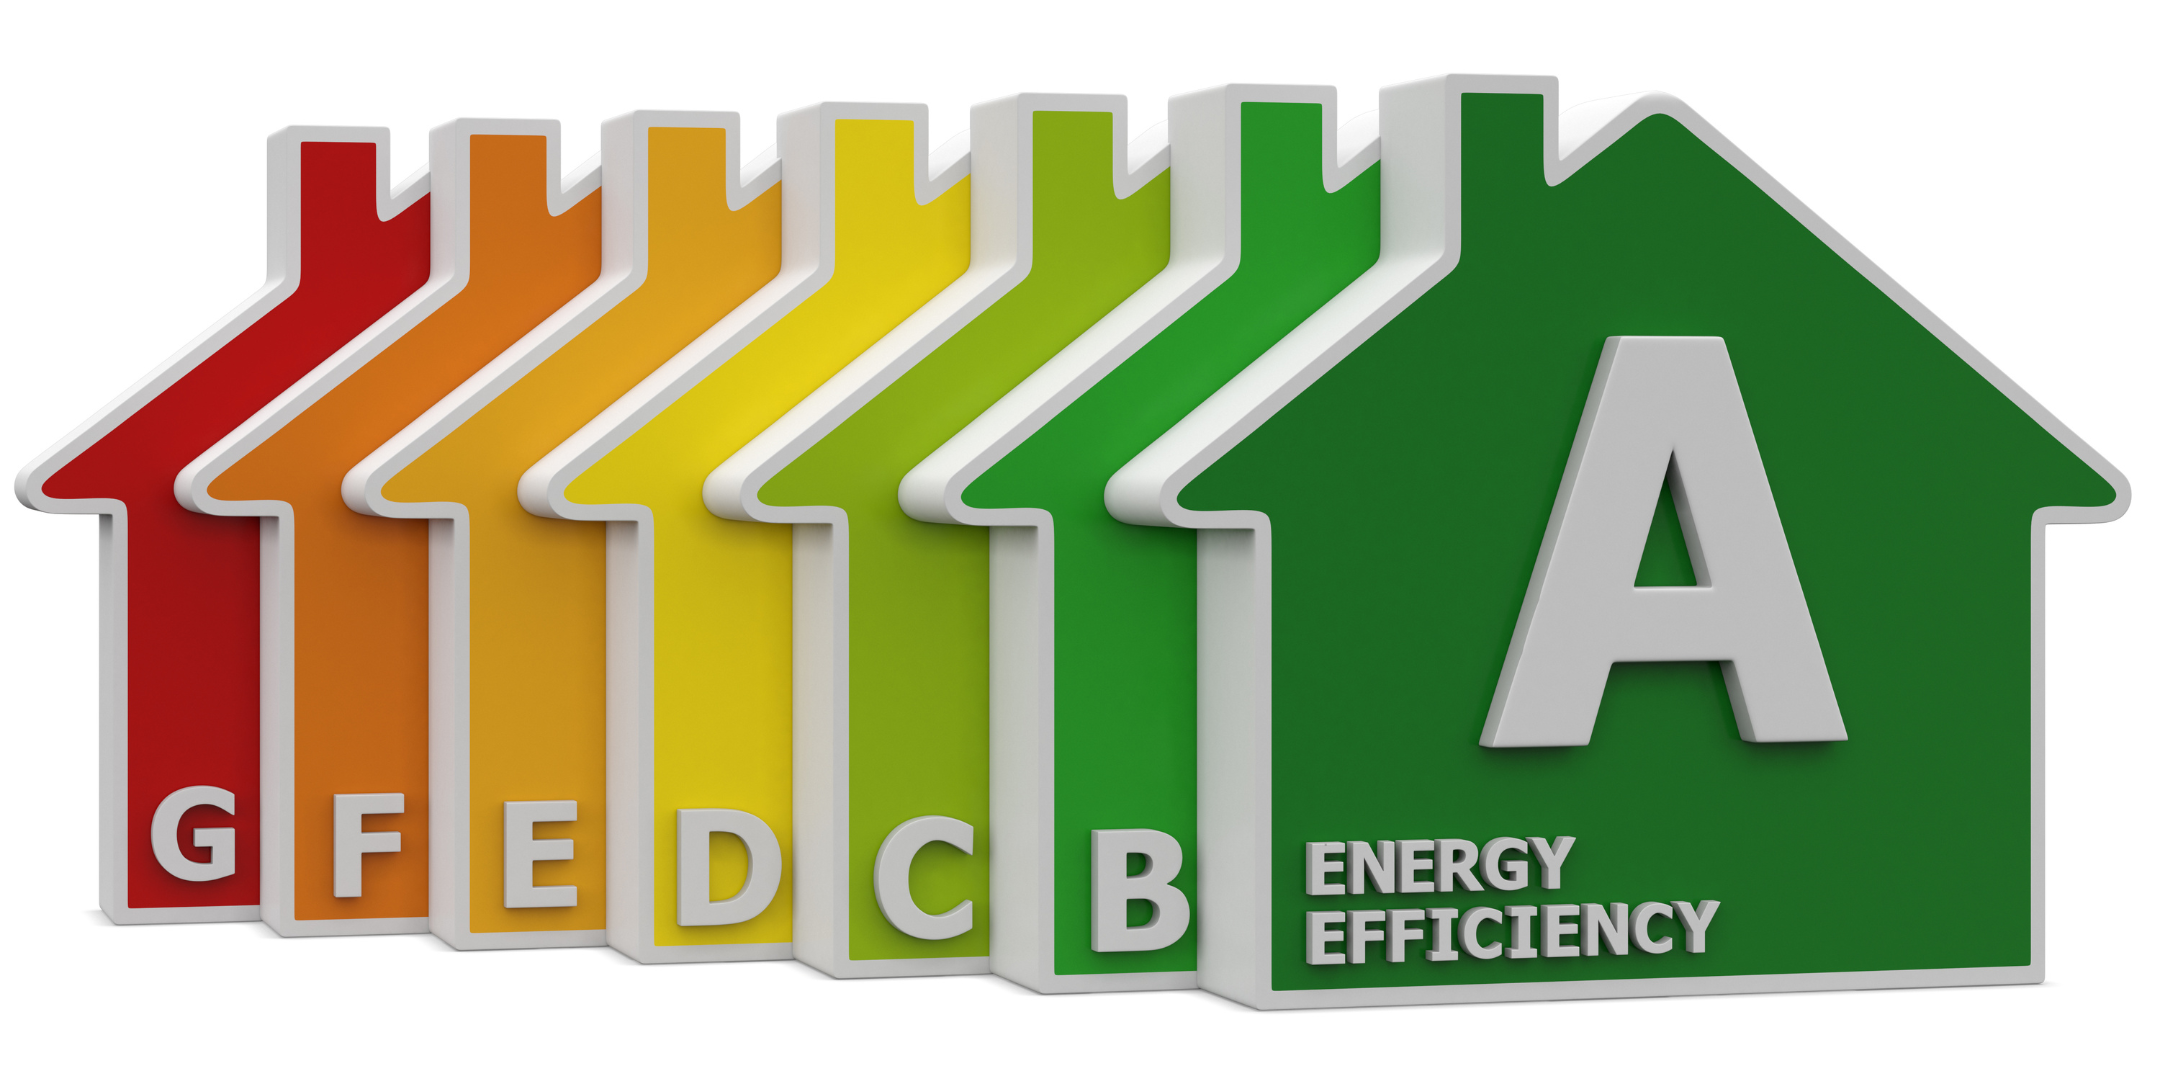 Next steps in reforming EPCs